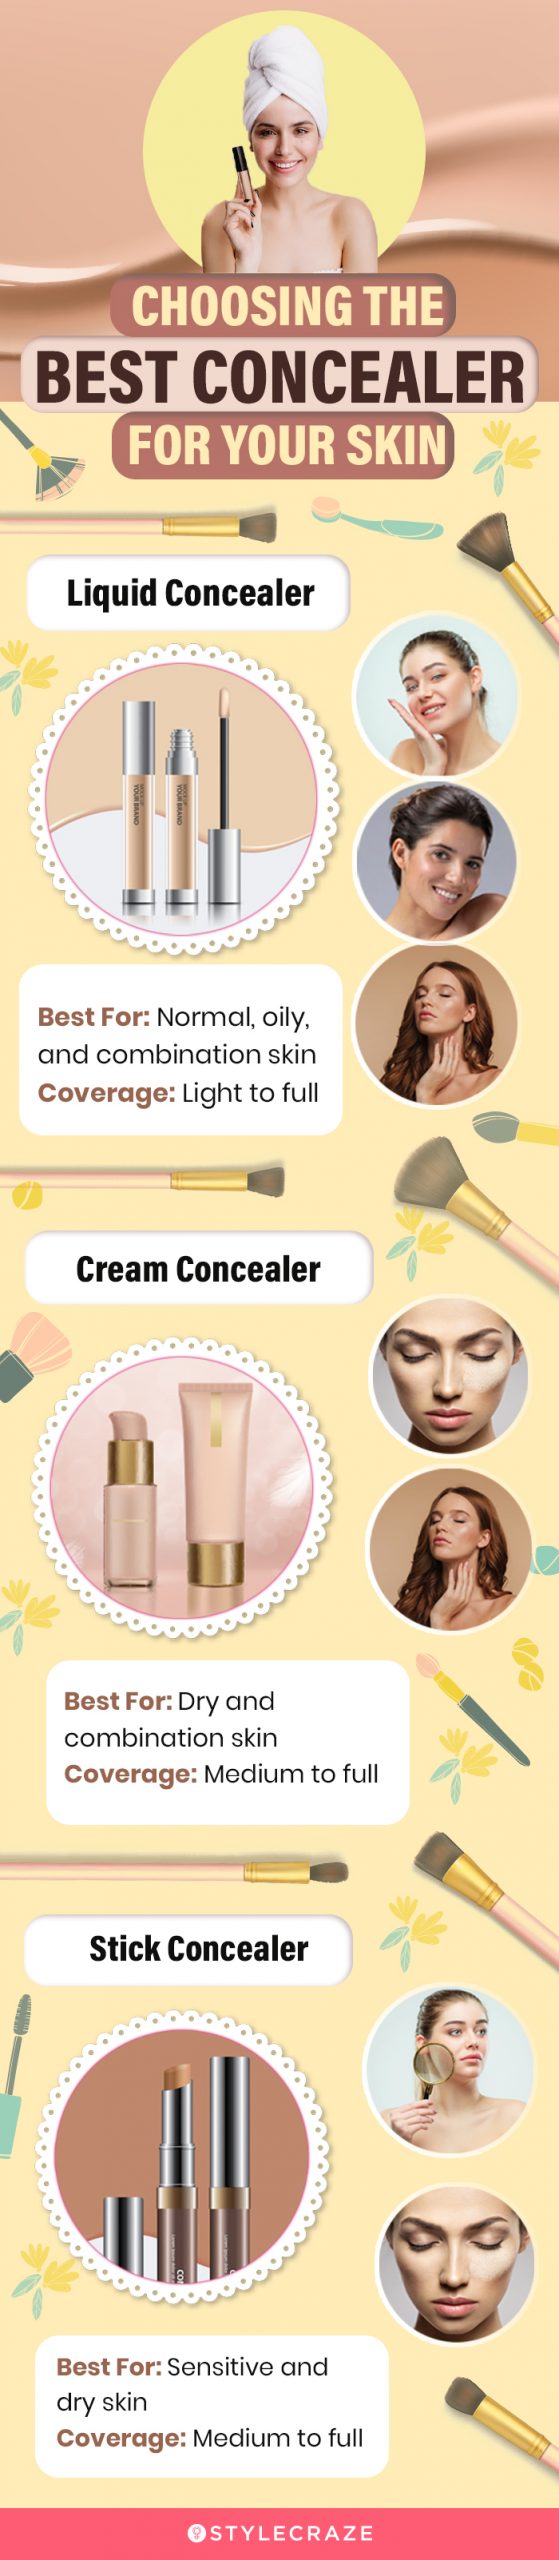 choosing the best concealer for your skin [infographic]